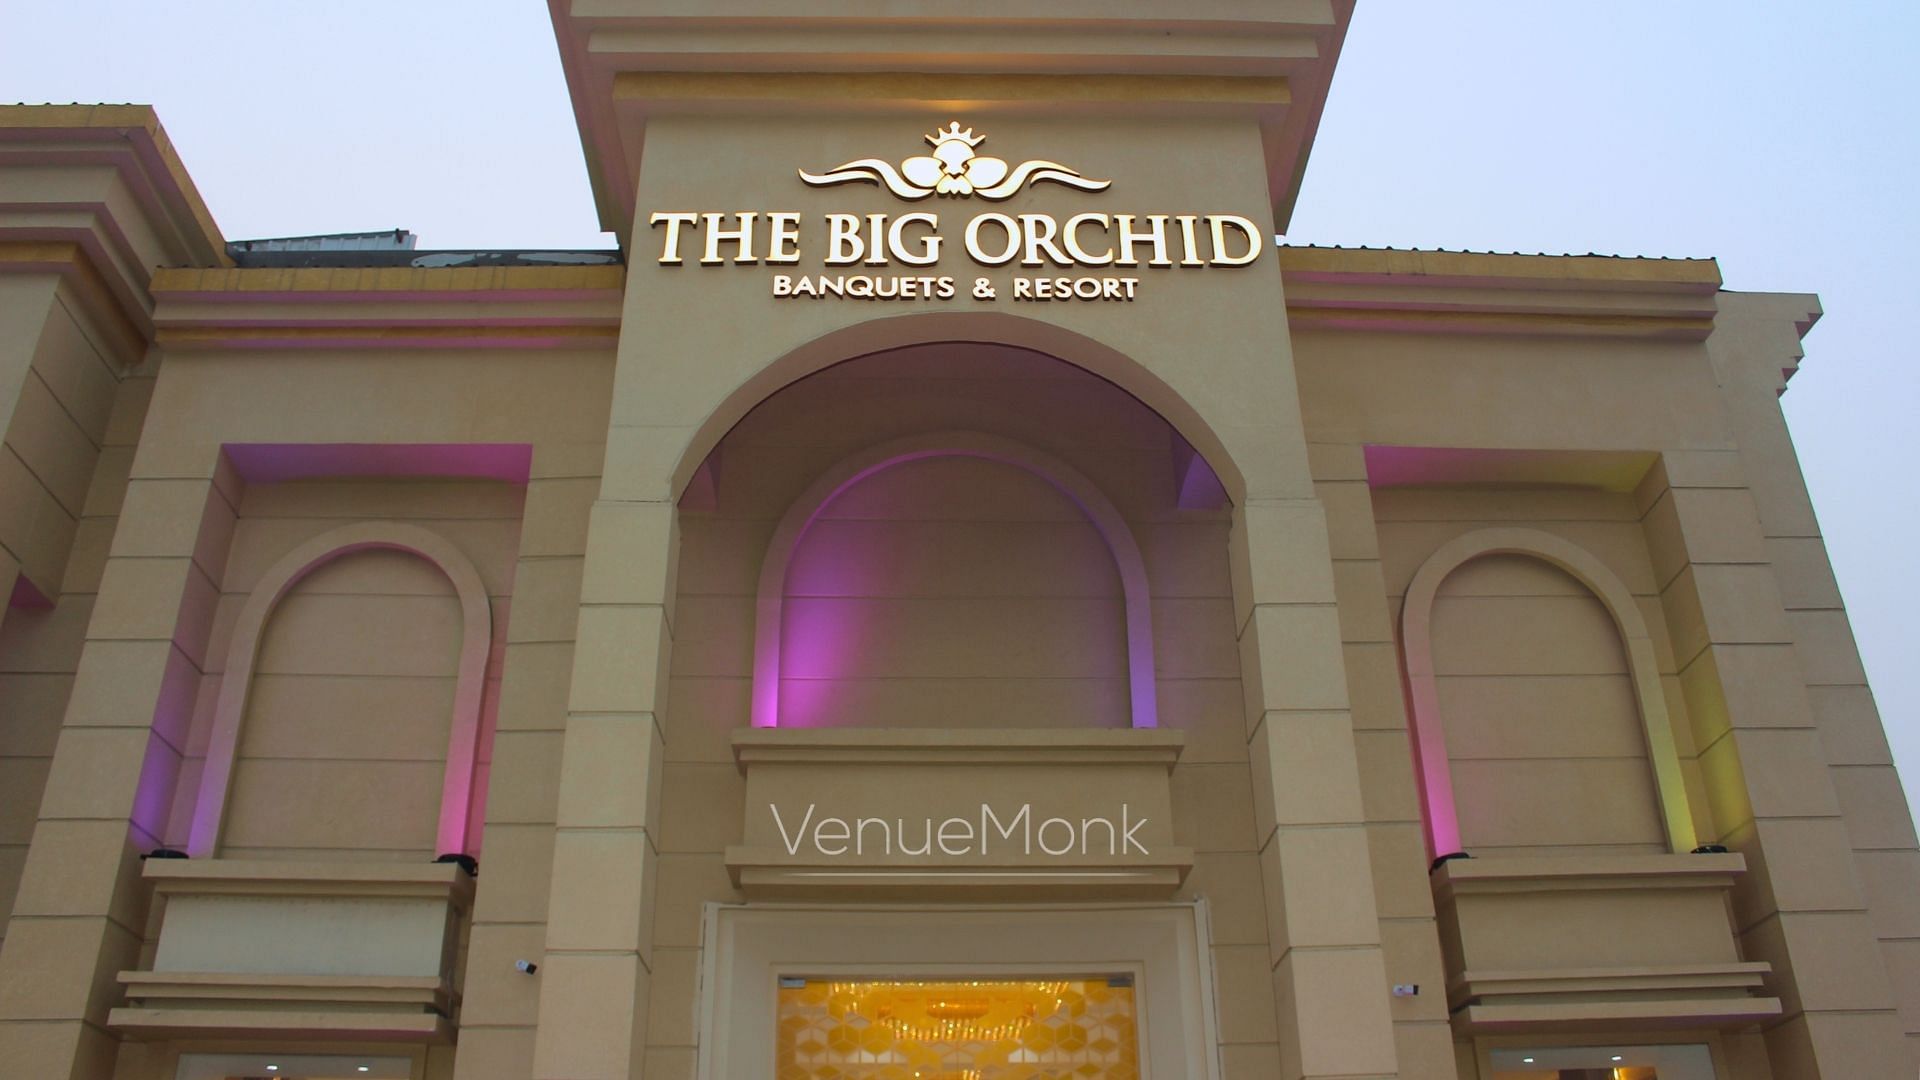 The Big Orchid in Badkhal, Faridabad